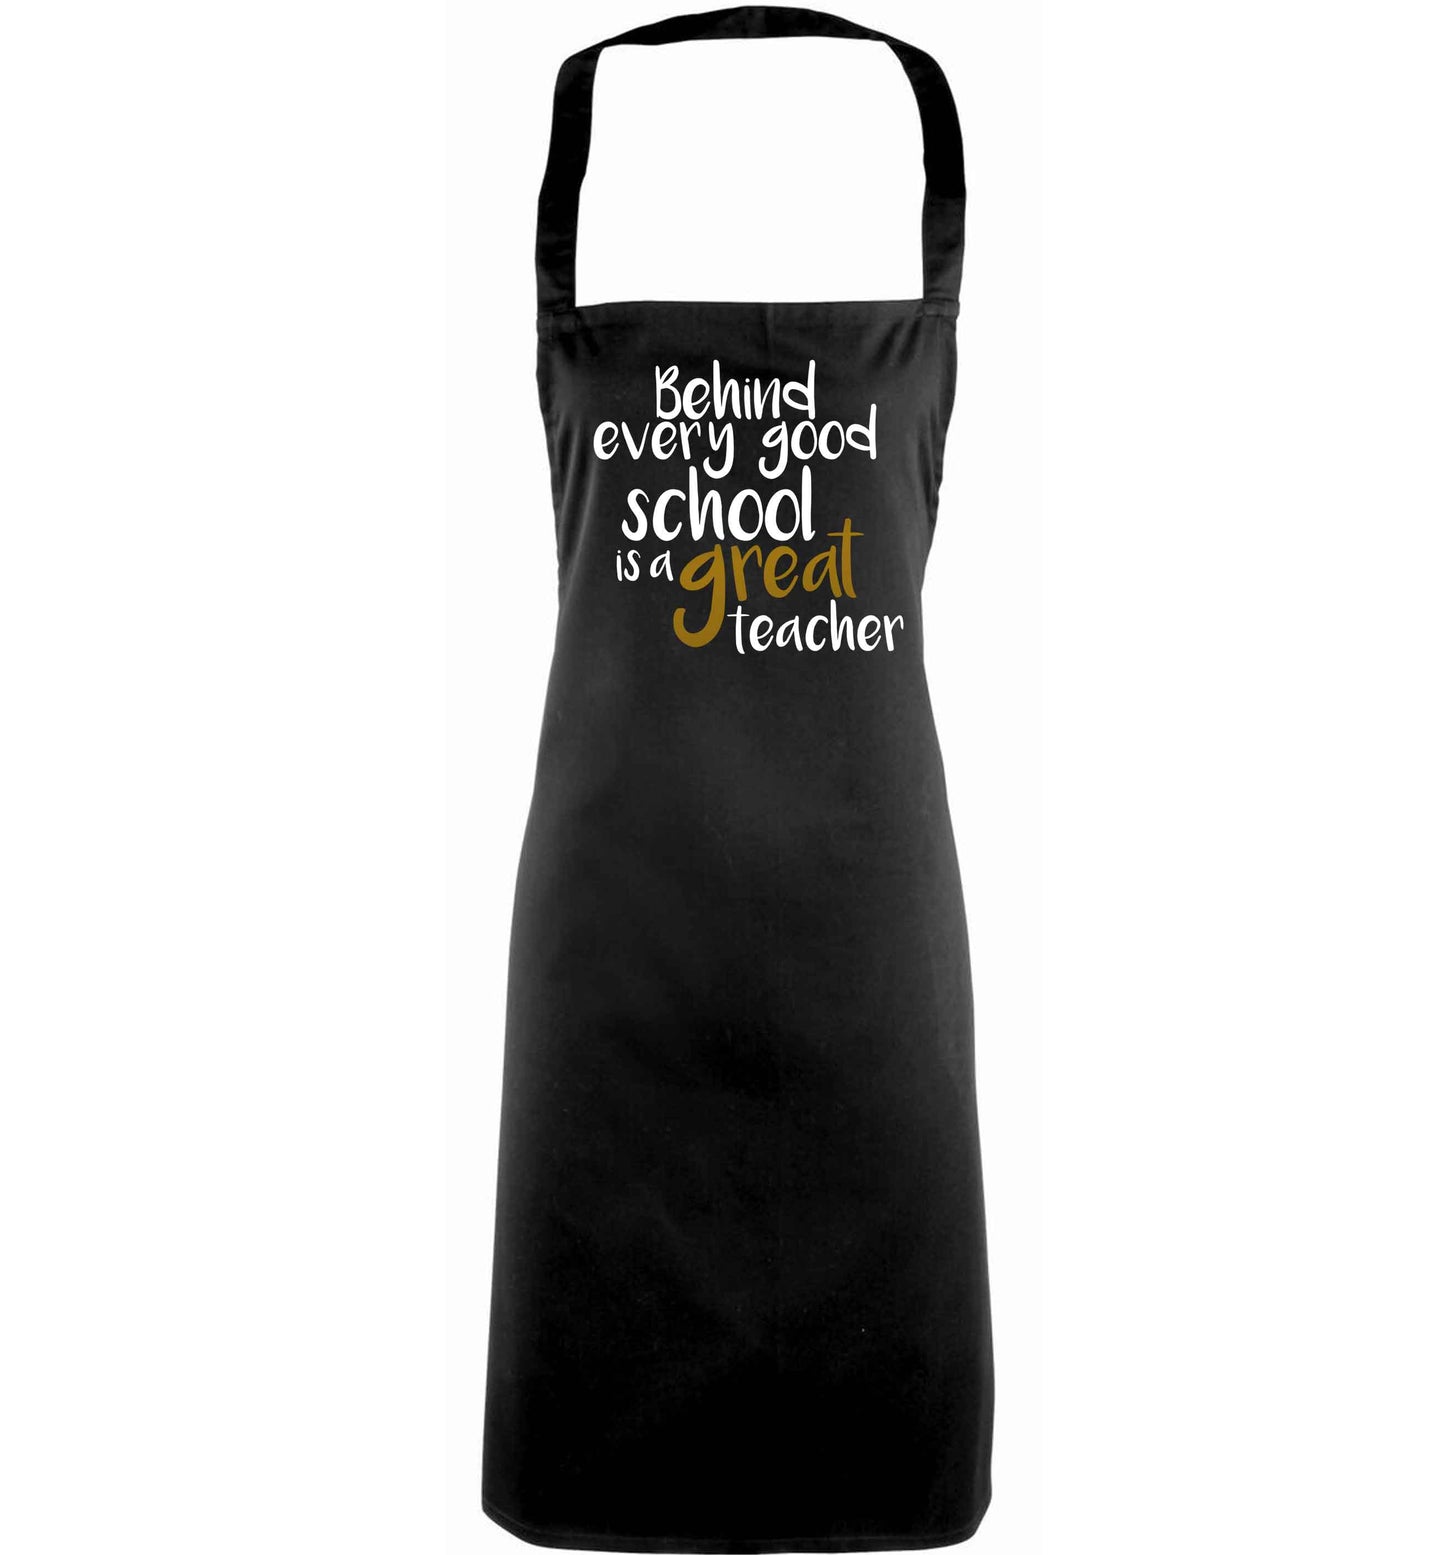 Behind every good school is a great teacher adults black apron